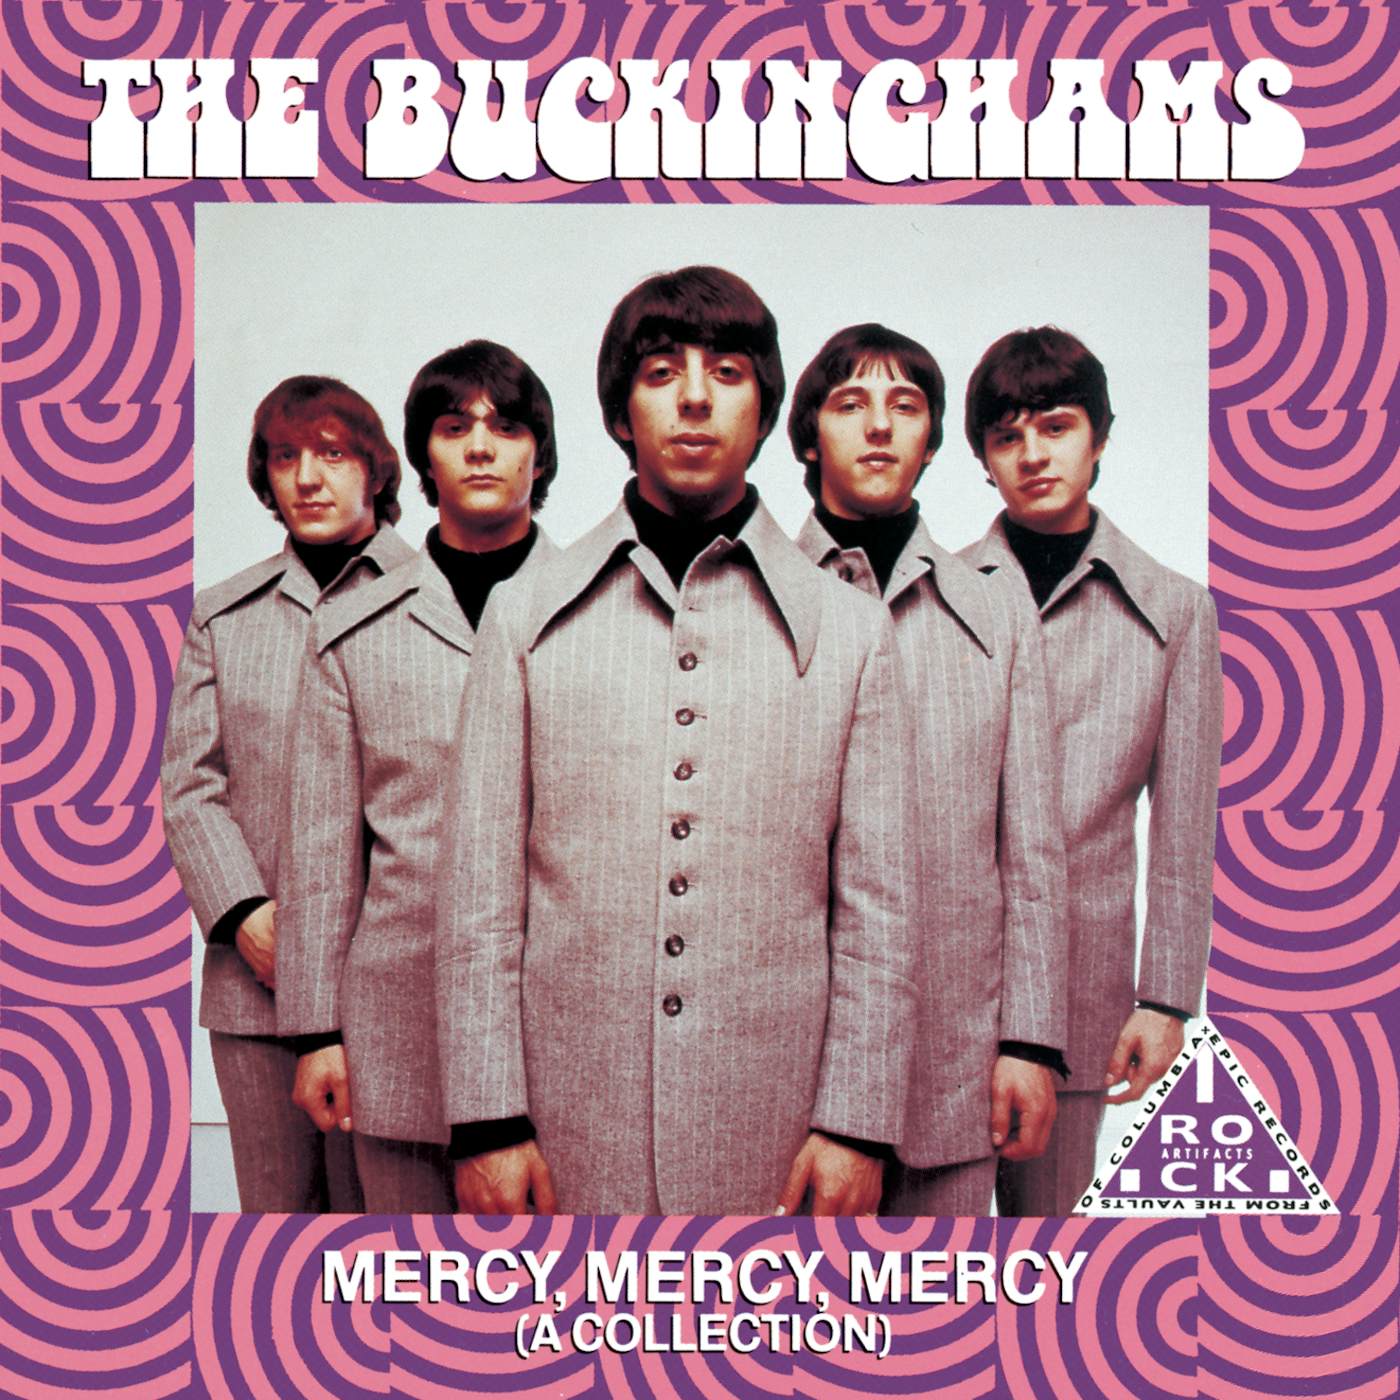 The Buckinghams MERCY MERCY MERCY: A COLLECTION CD